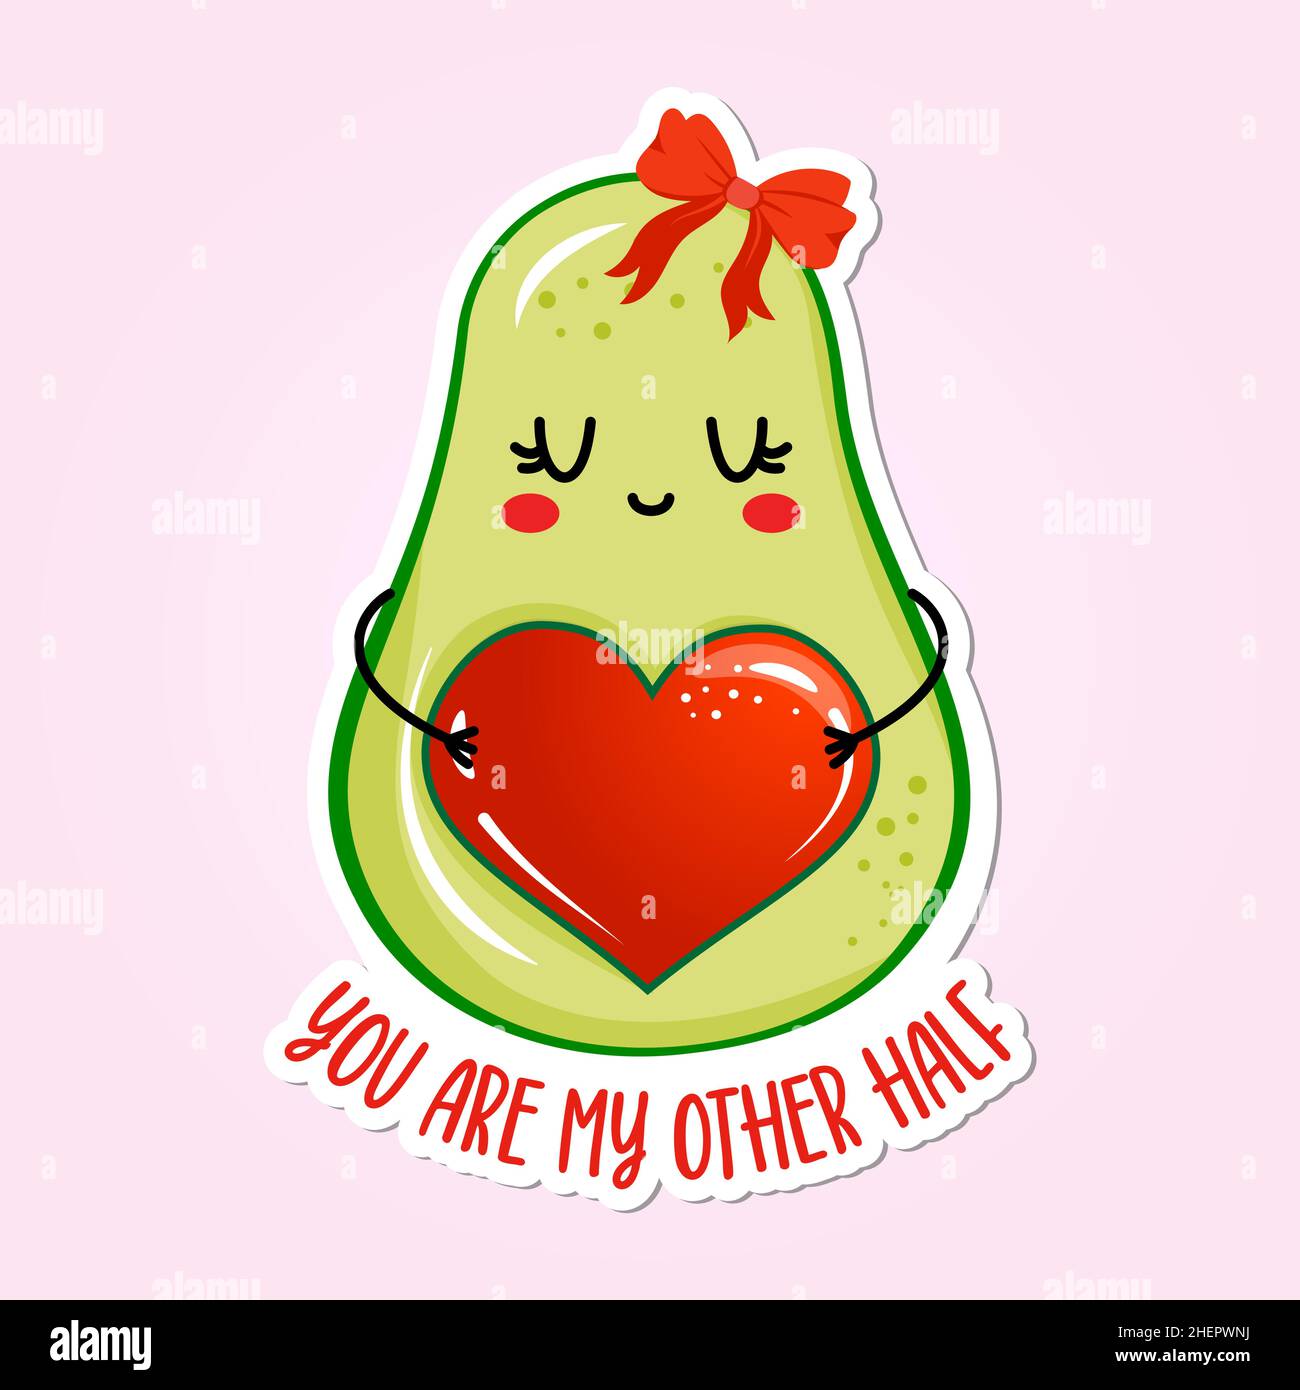 You are my other half - Cute hand drawn avocado couple illustration kawaii style. Valentine's Day color poster. Good for posters, greeting cards, bann Stock Vector